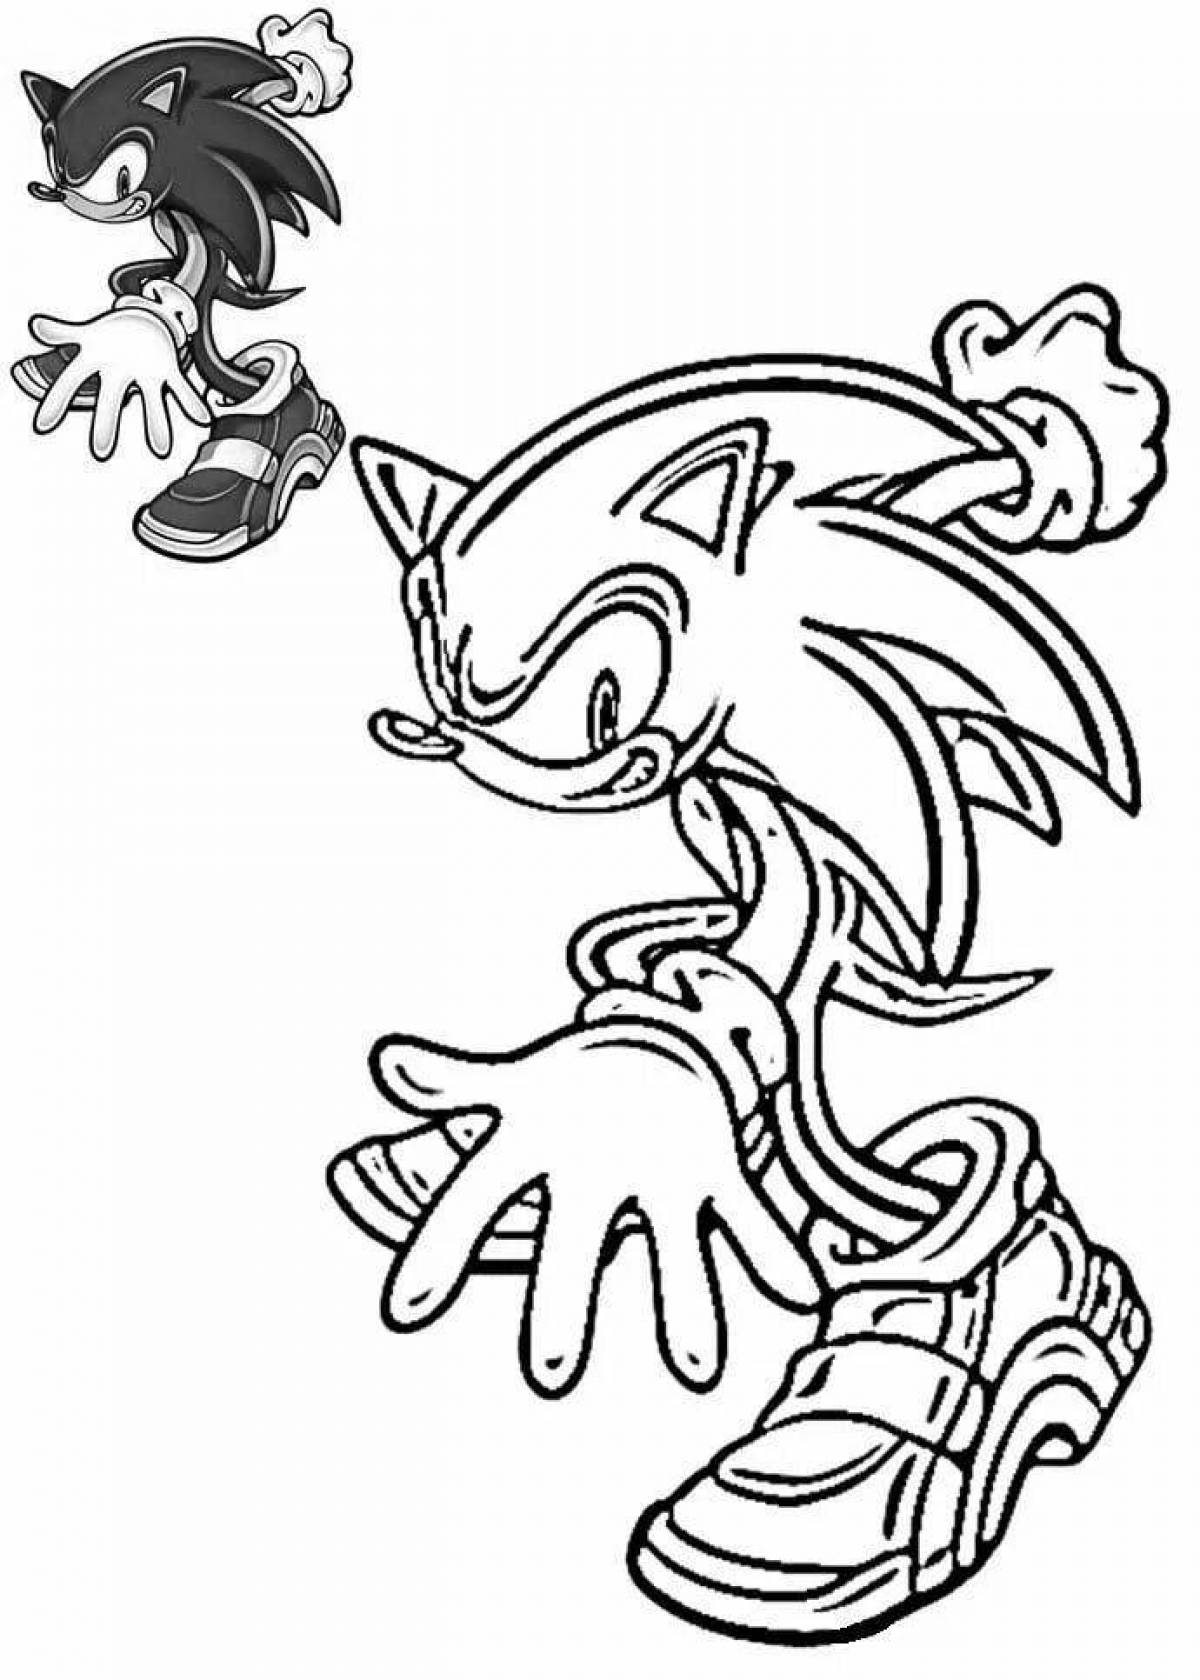 Sonic by numbers live coloring